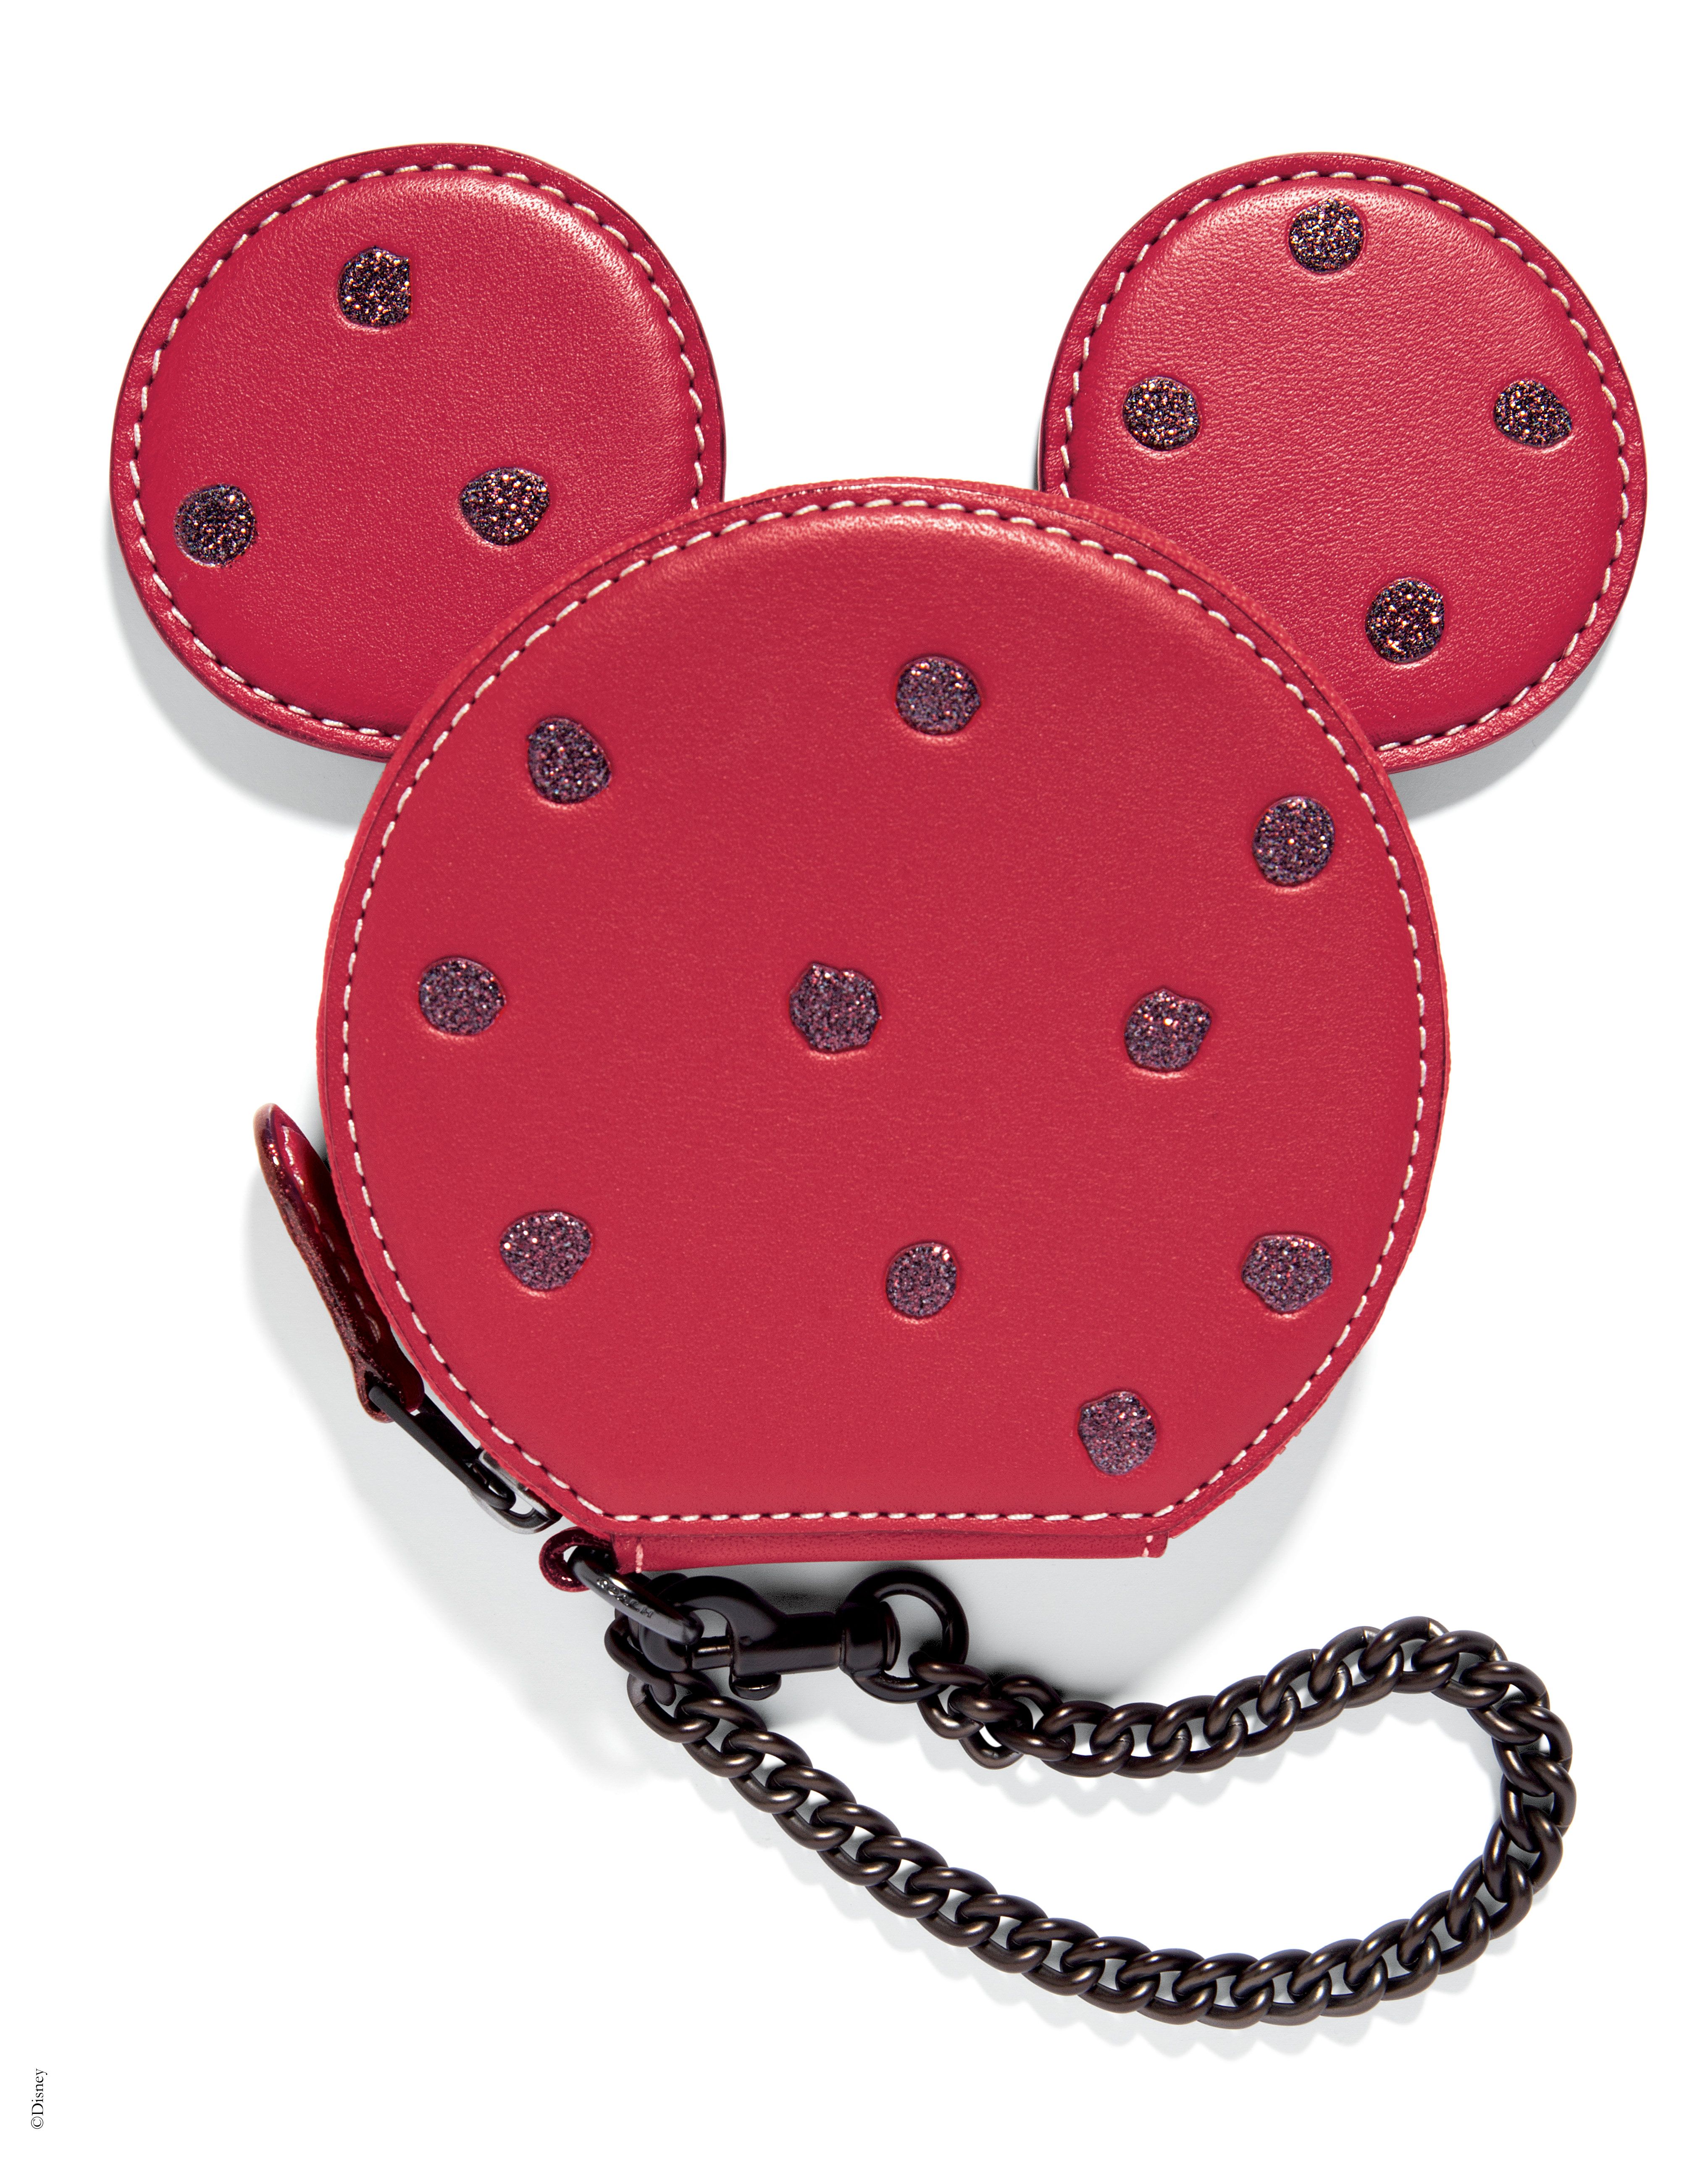 Minnie Mouse by Mirage Officially Licensed Disney Mini Handbag Style Coin Purse 